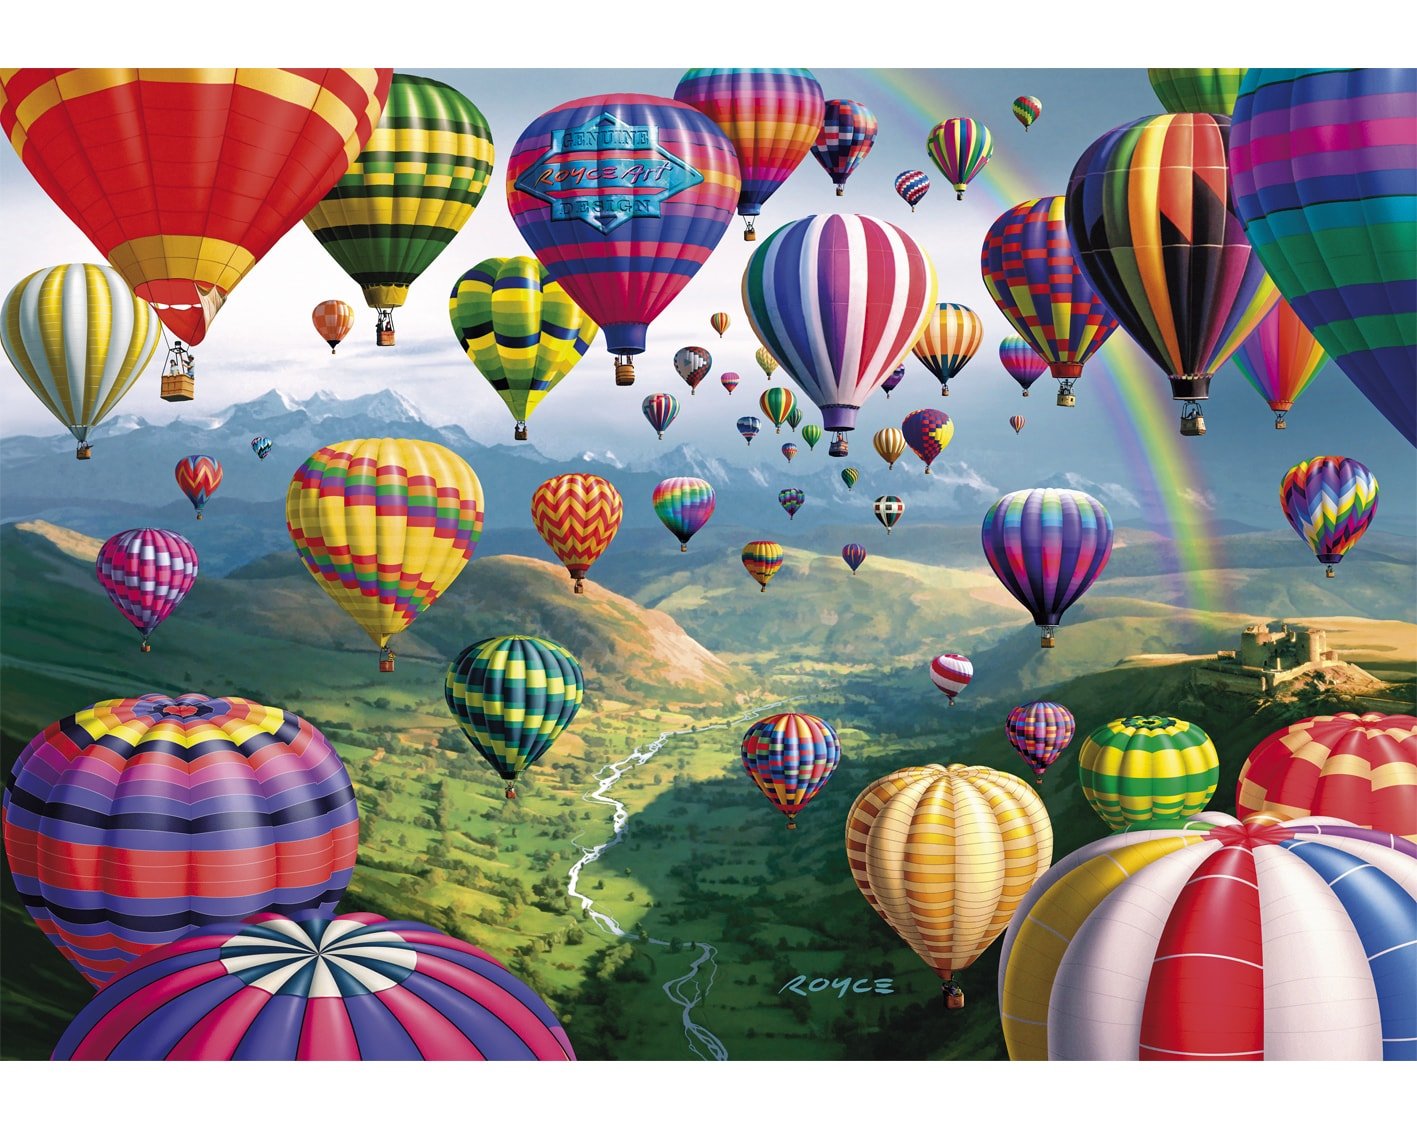 SKY ROADS 250 Pieces WENTWORTH WOODEN JIGSAW PUZZLE 